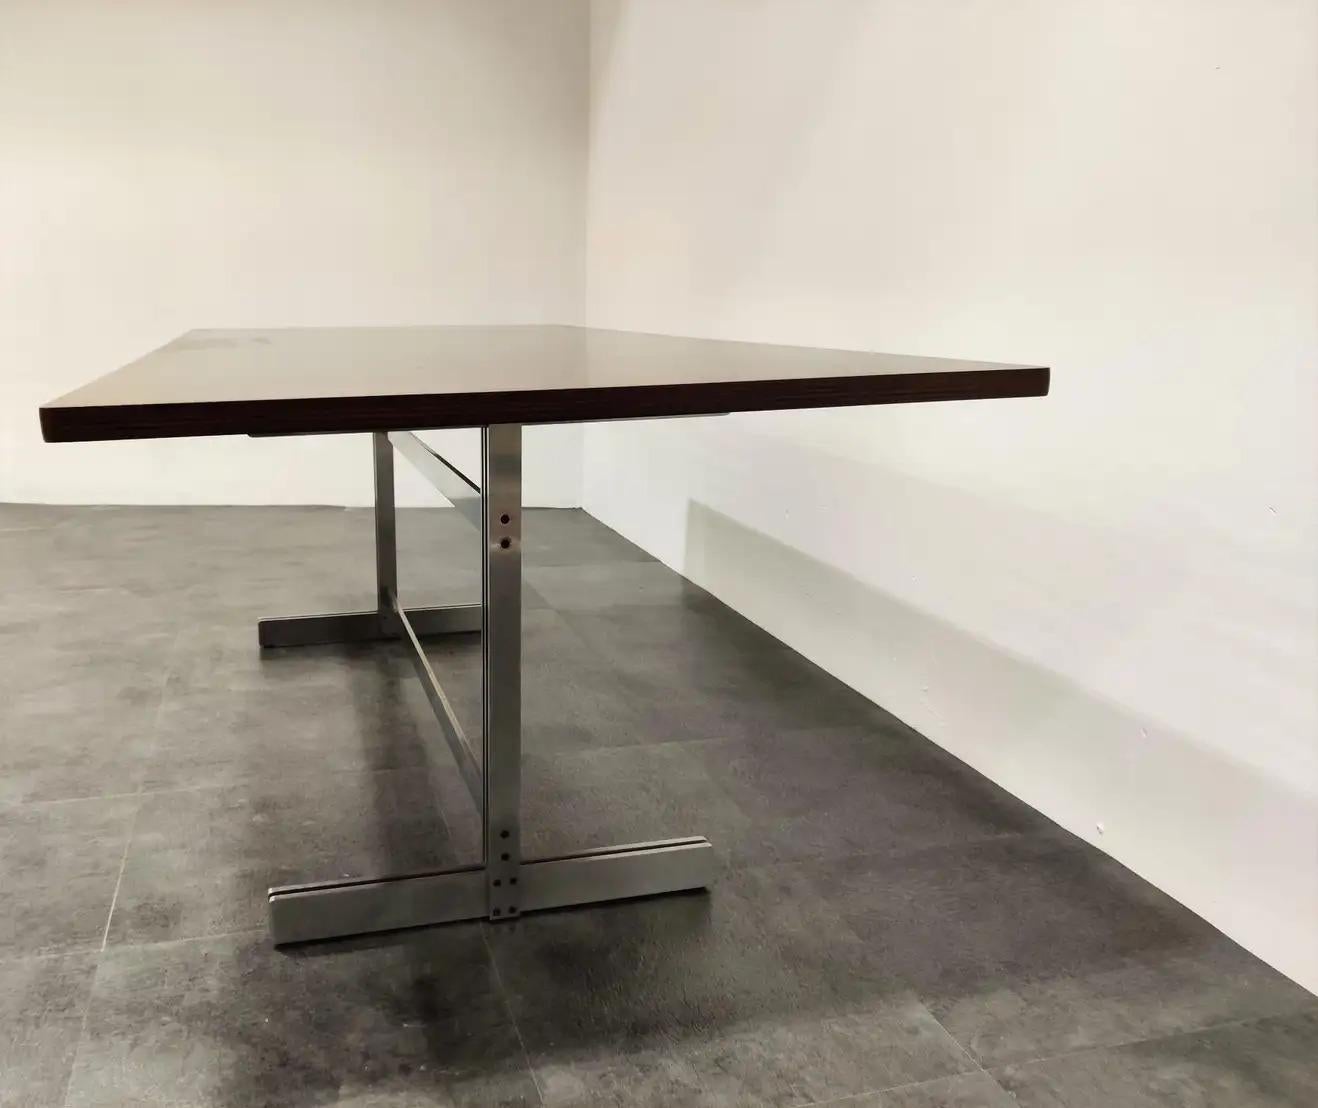 Exclusive and timeless designed dining table by Jules Wabbes for Mobilier Universel.

This table has a beautiful modernist design and features a fully restored wooden top mounted on a steel base.

Can be used as a dining table, conference table